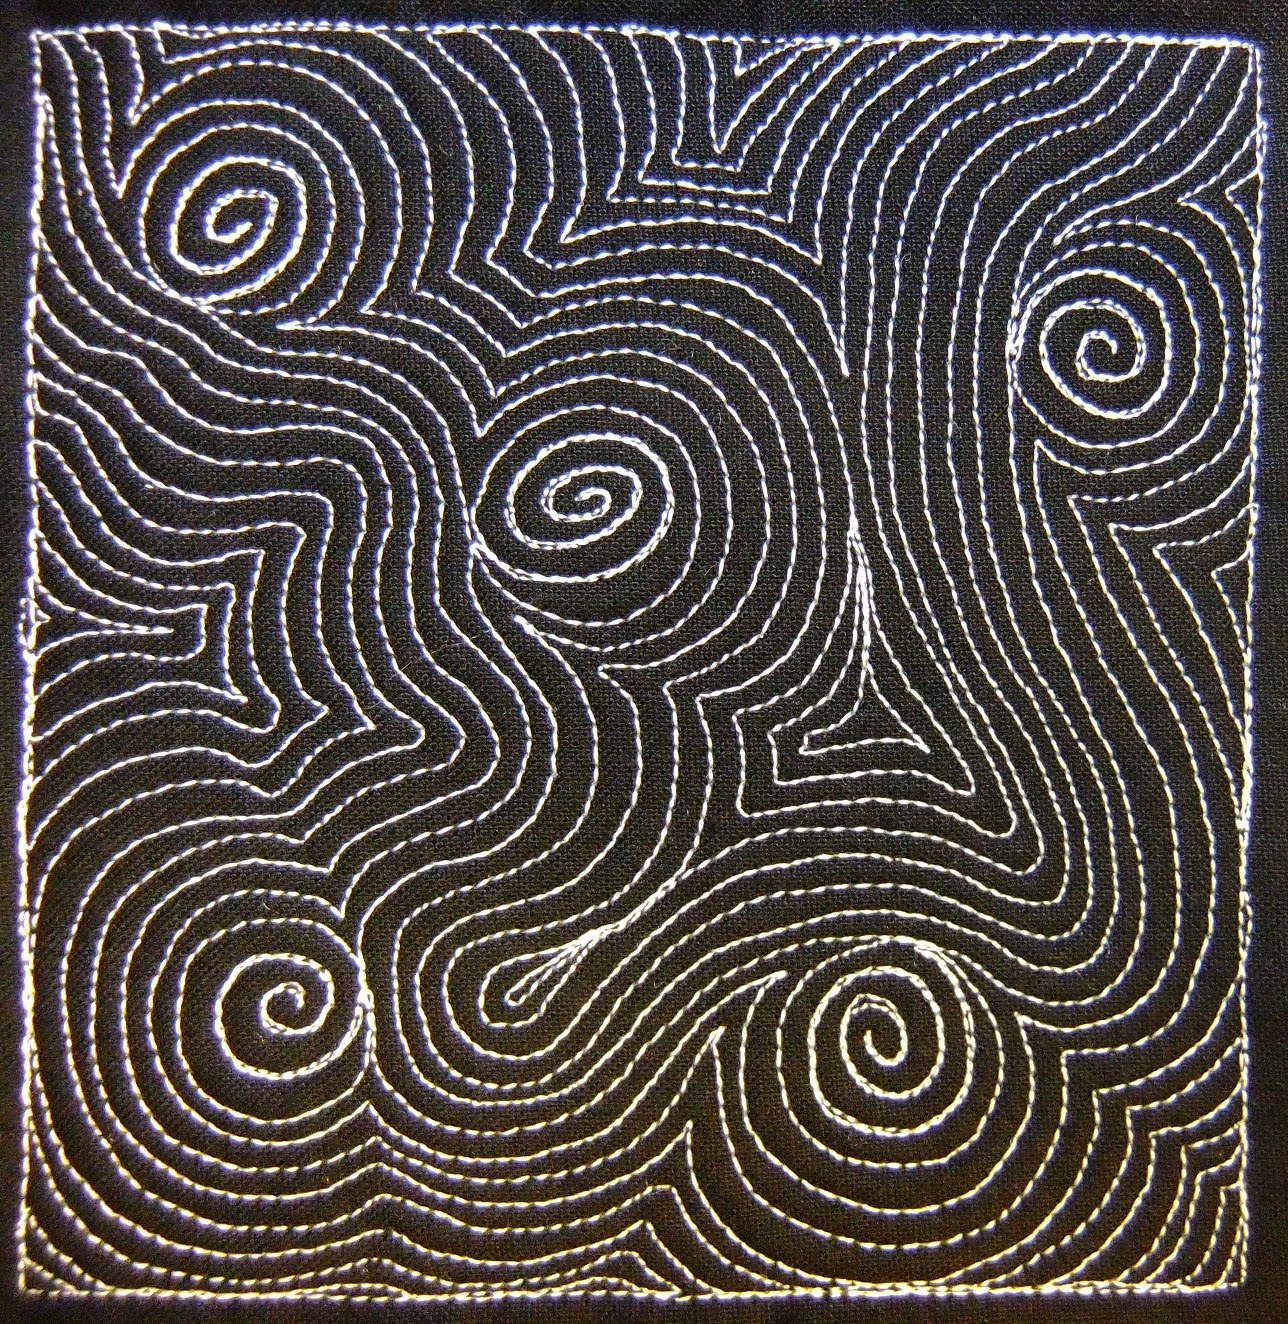 The Free Motion Quilting Project: Day 238 - Whirlpools